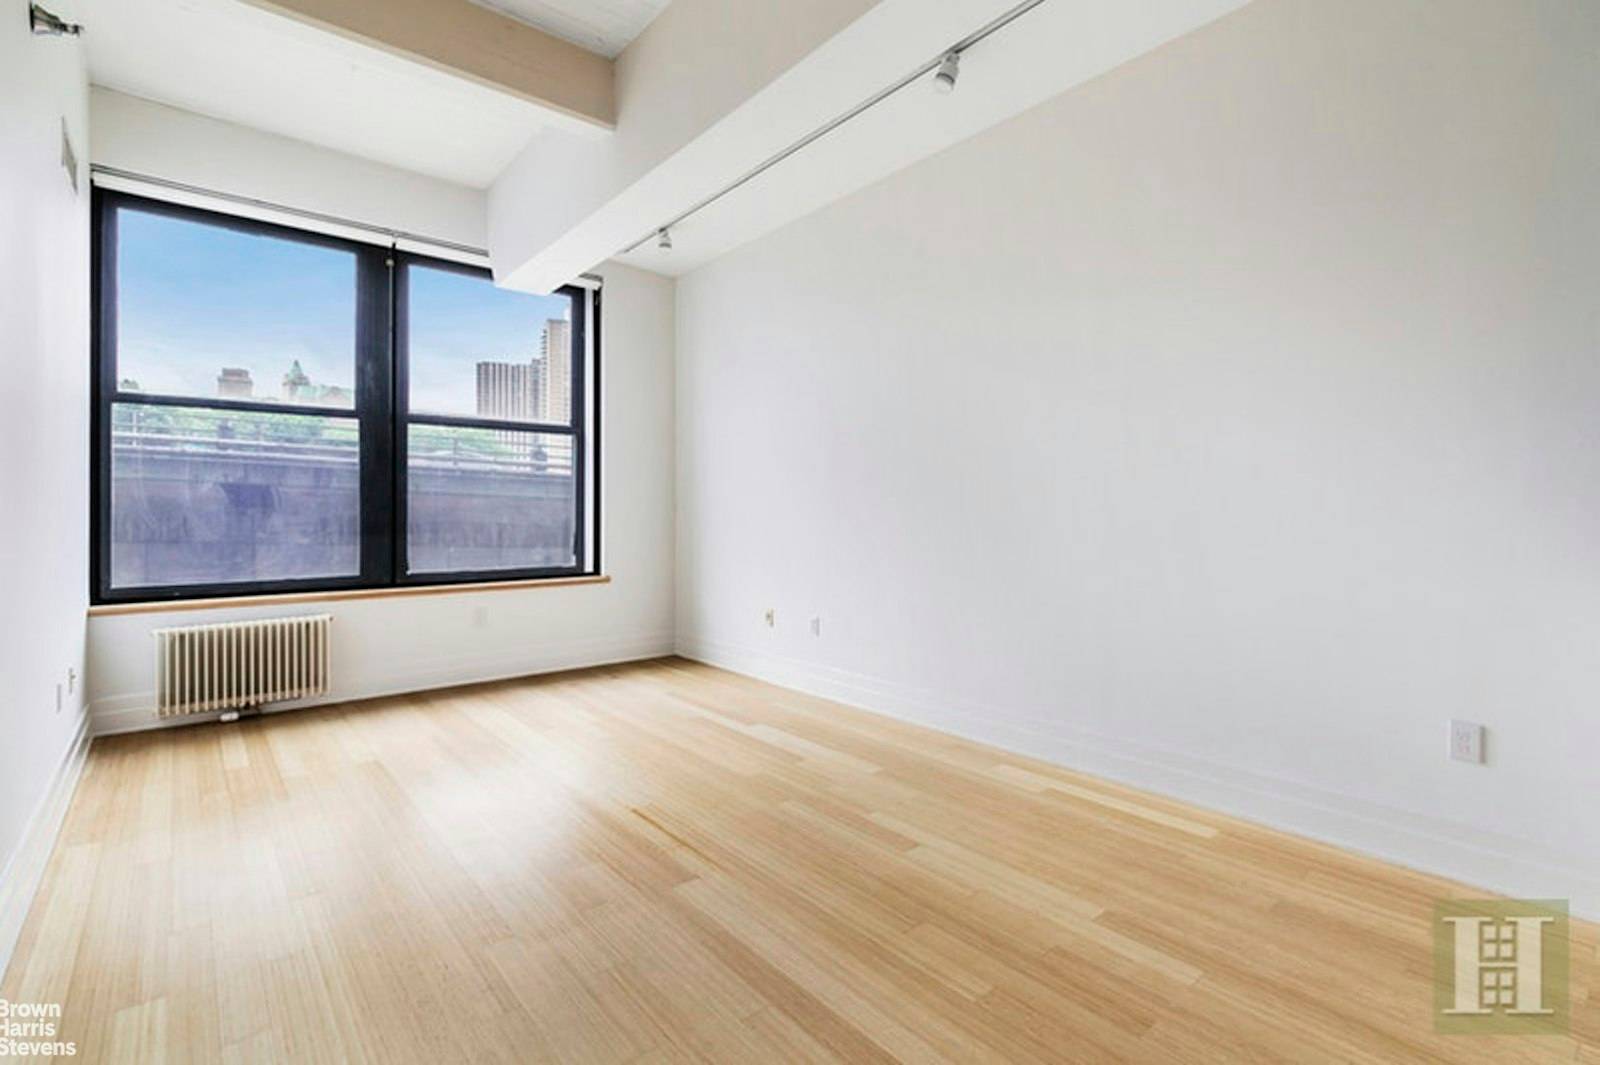 Smartly laid out south facing 1bedroom 1bath loft with a large walk in closet in one of Dumbo's premier condominiums.